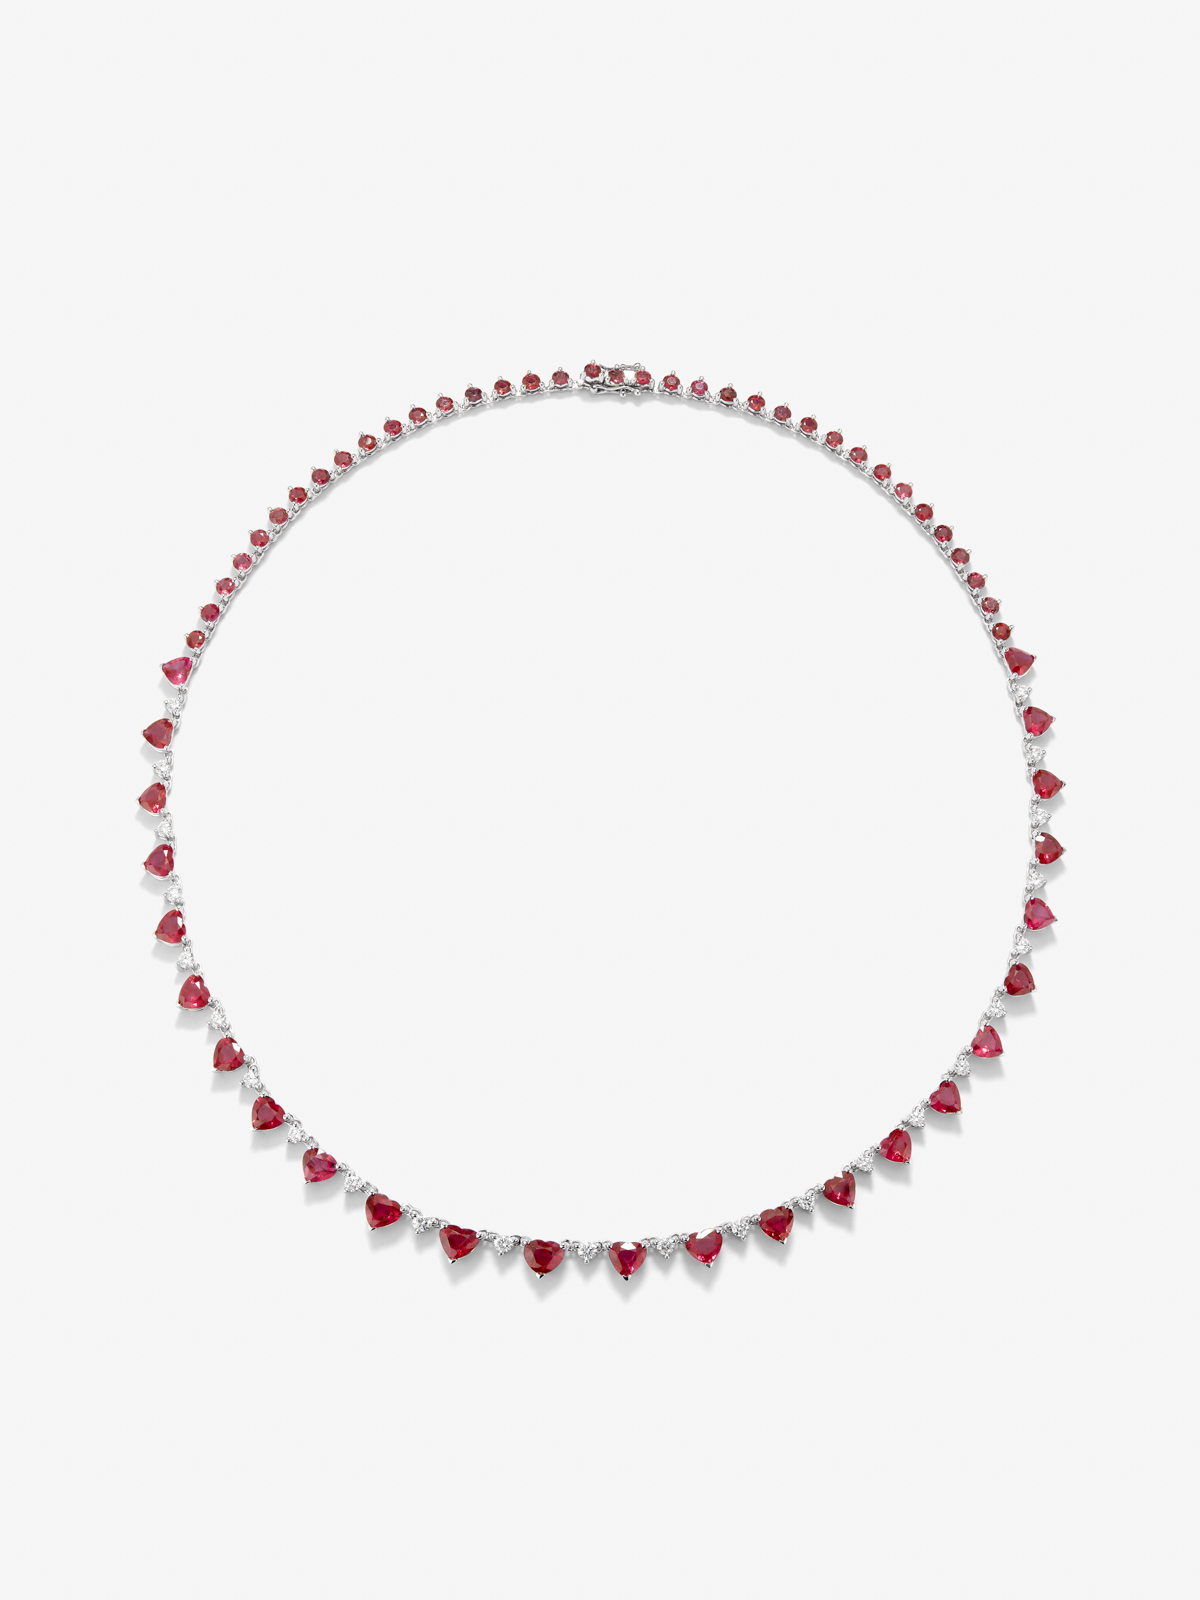 18K white gold necklace with red ruby ​​with 17.03 cts and white diamonds in bright 1.3 cts diamonds